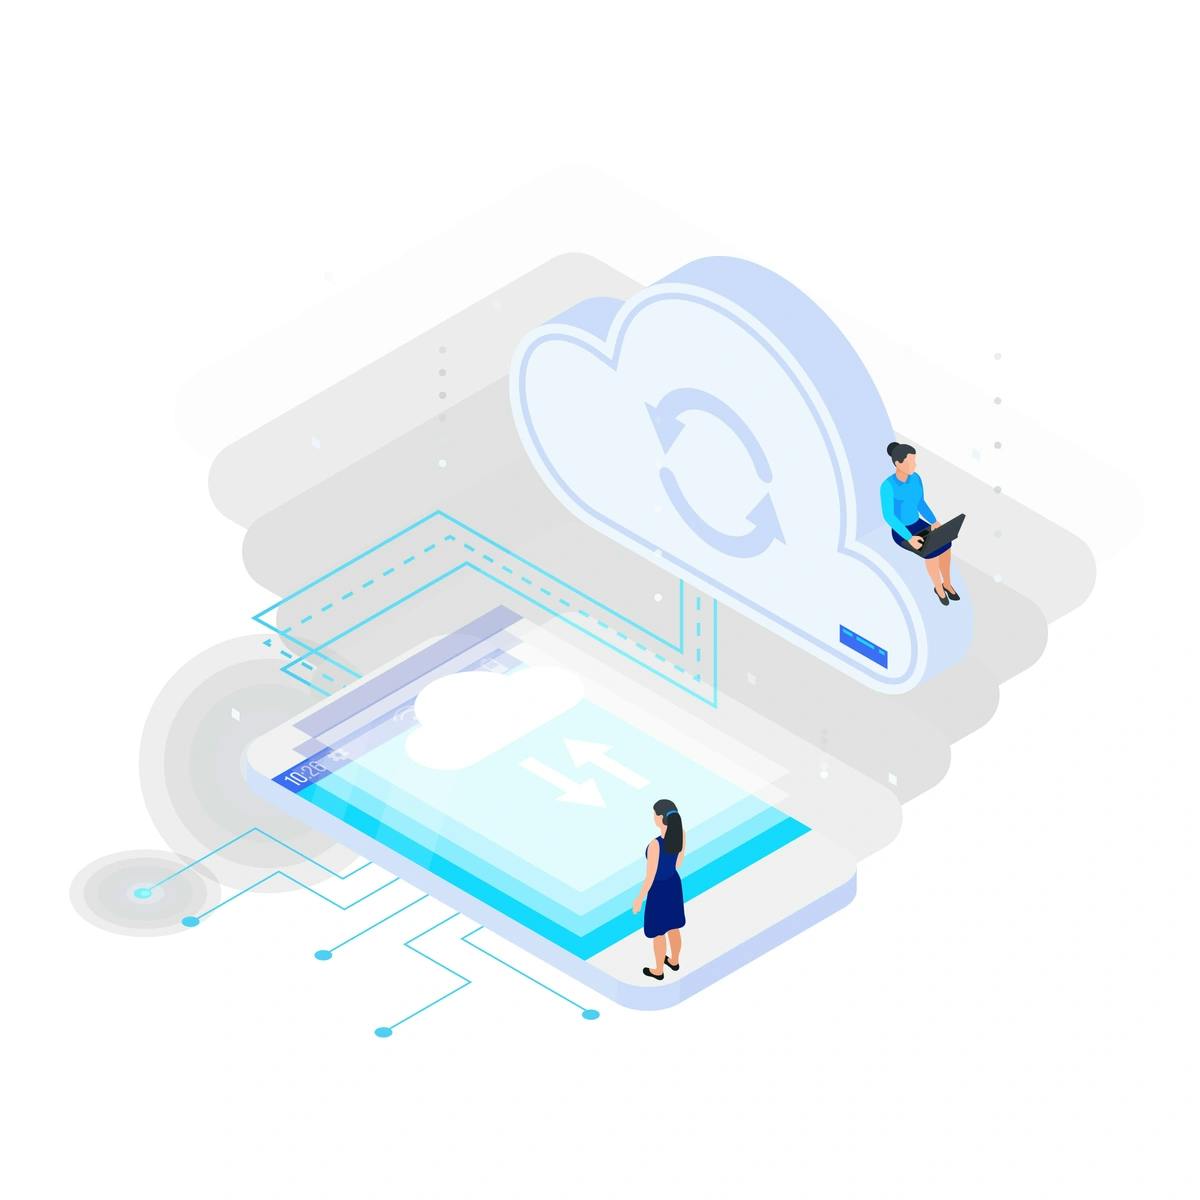 Isometric illustration of cloud computing concept with figures working on laptop and tablet.